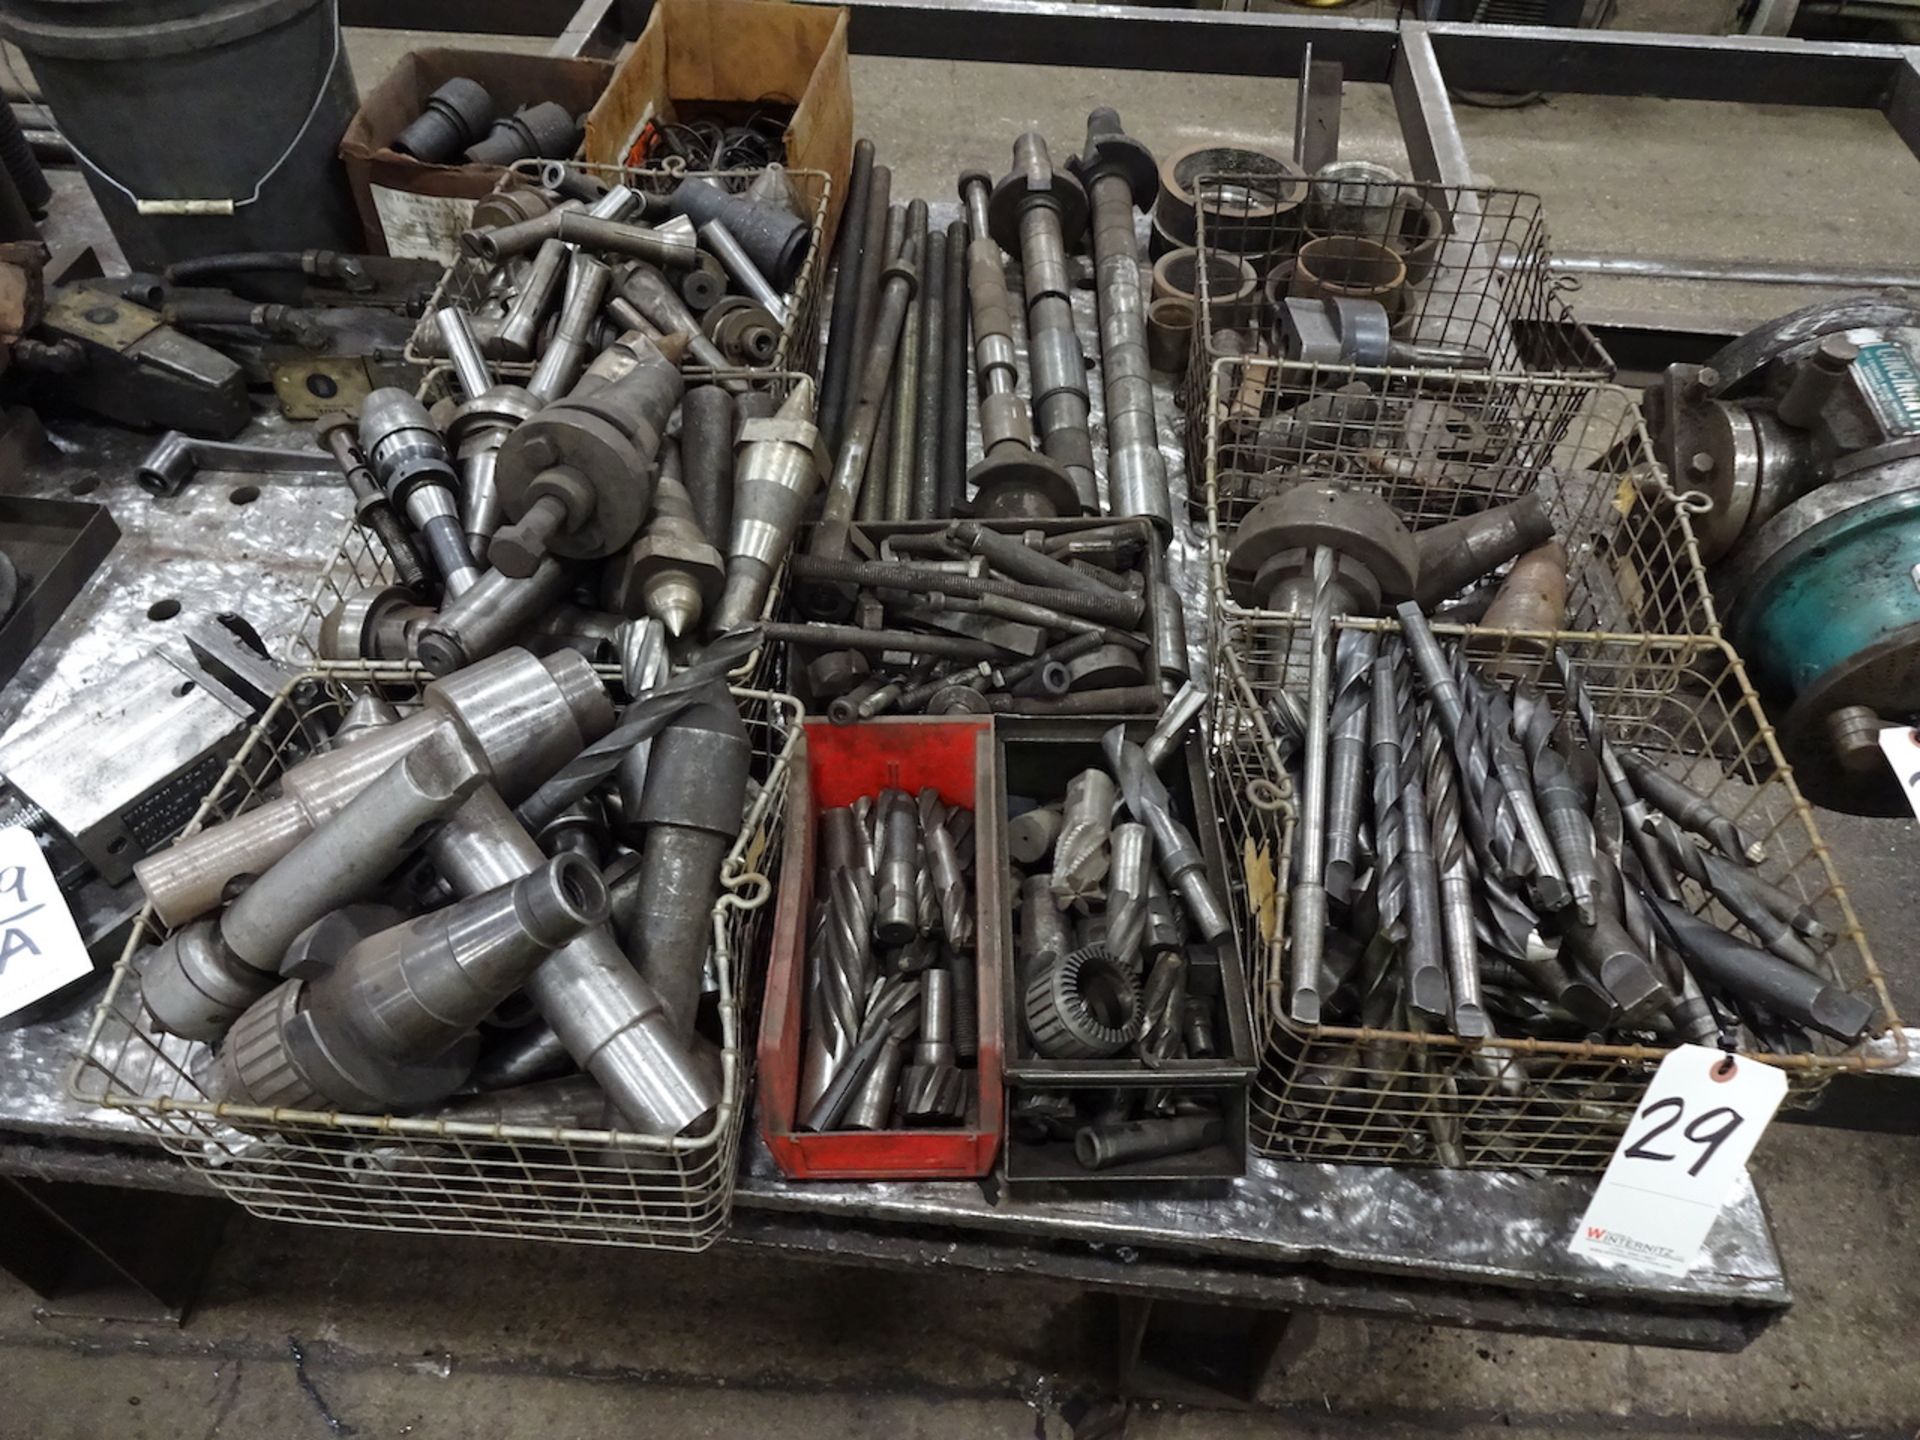 LOT: Assorted Tooling including Drill Bits, Arbors, Tool Holders, etc.